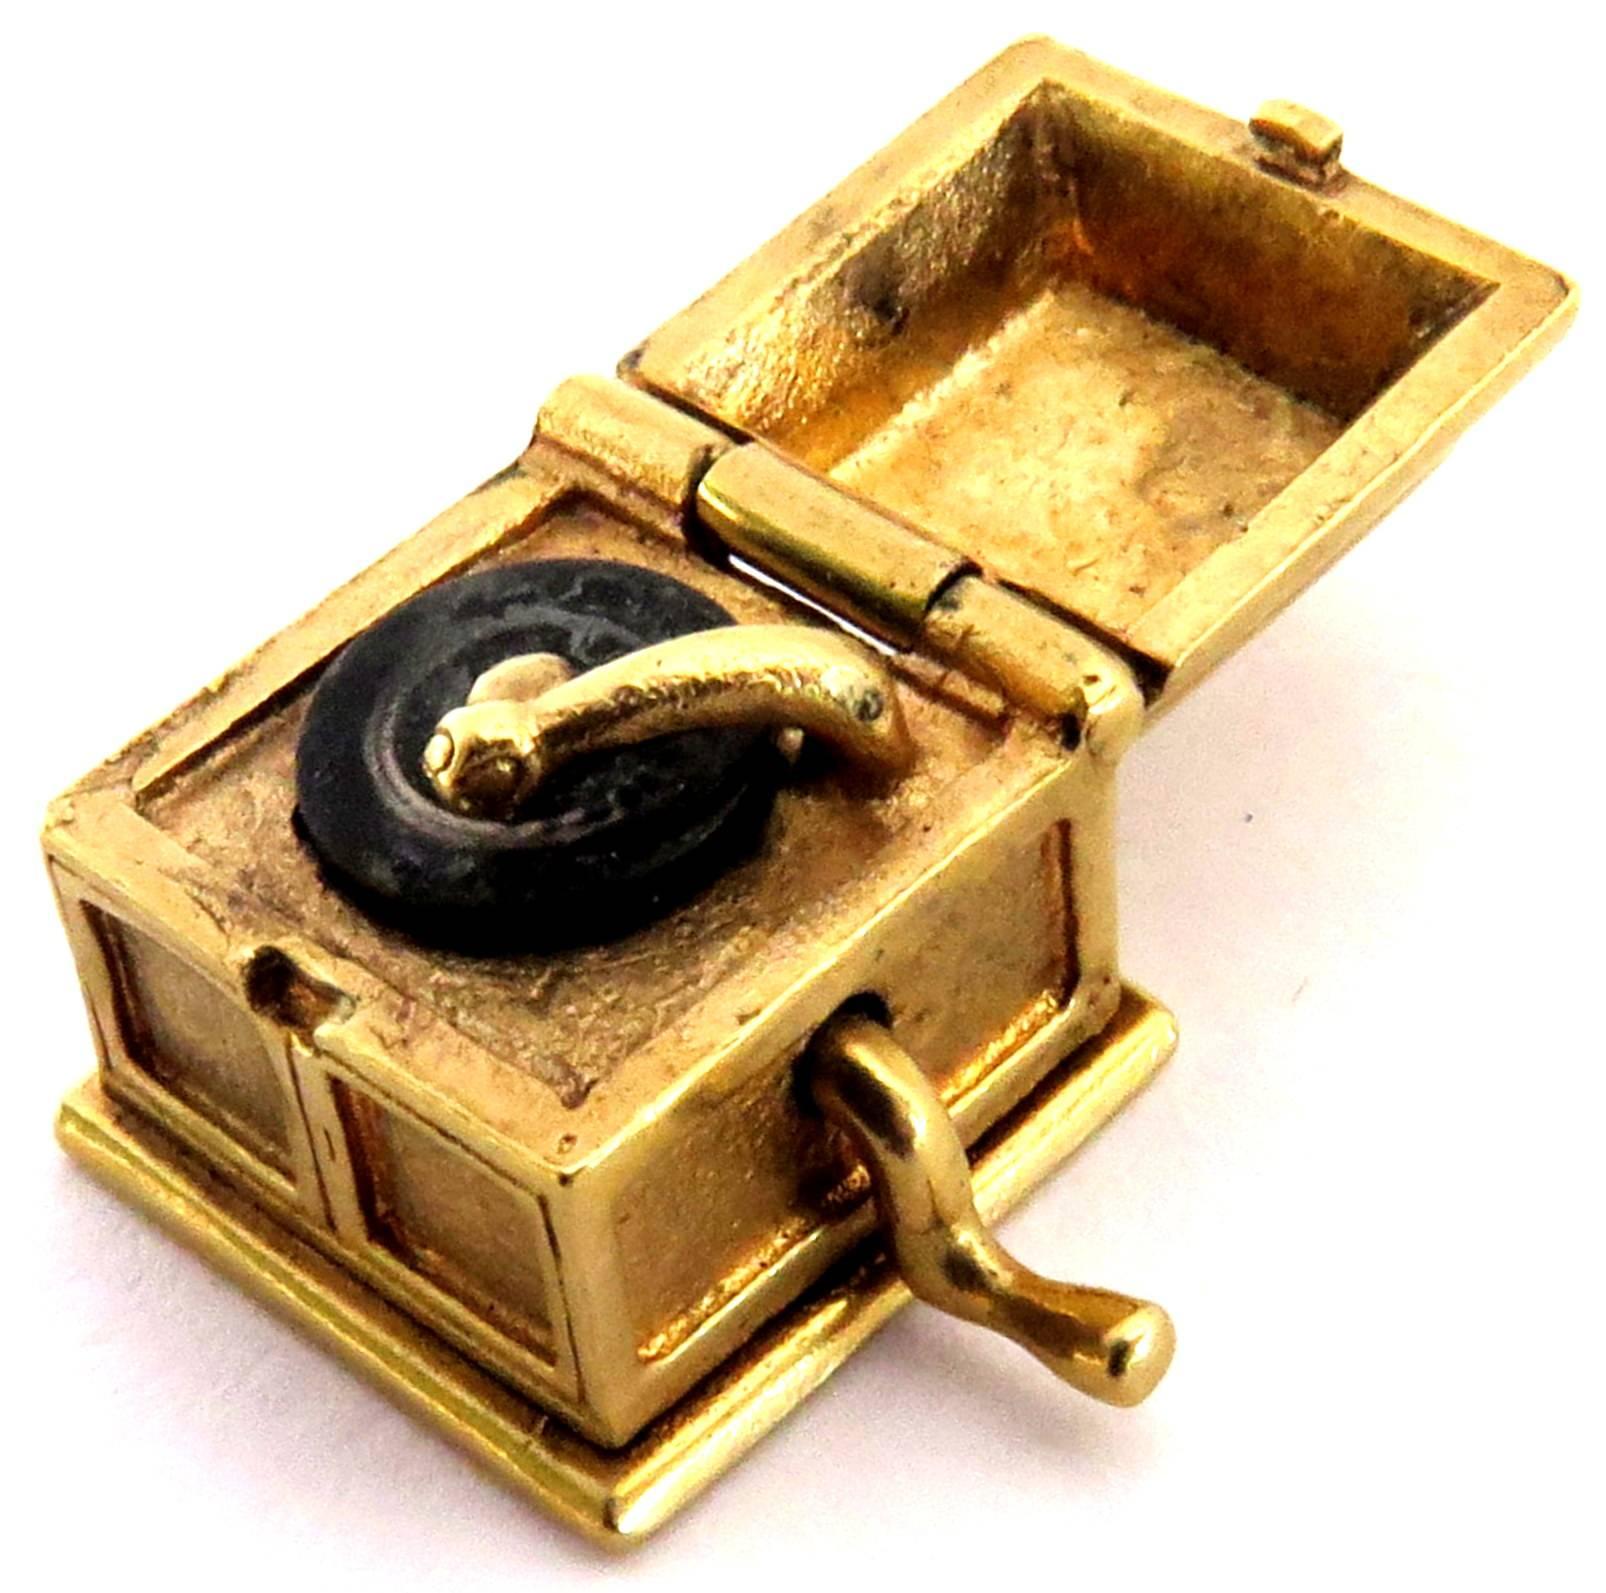 This wonderful 14k record player charm pendant opens to reveal a record on the turntable and has a crank on the side that turns.
This charm weighs 5.6 grams
This charm when opened measures 3/4 inch by 7/16 inch
